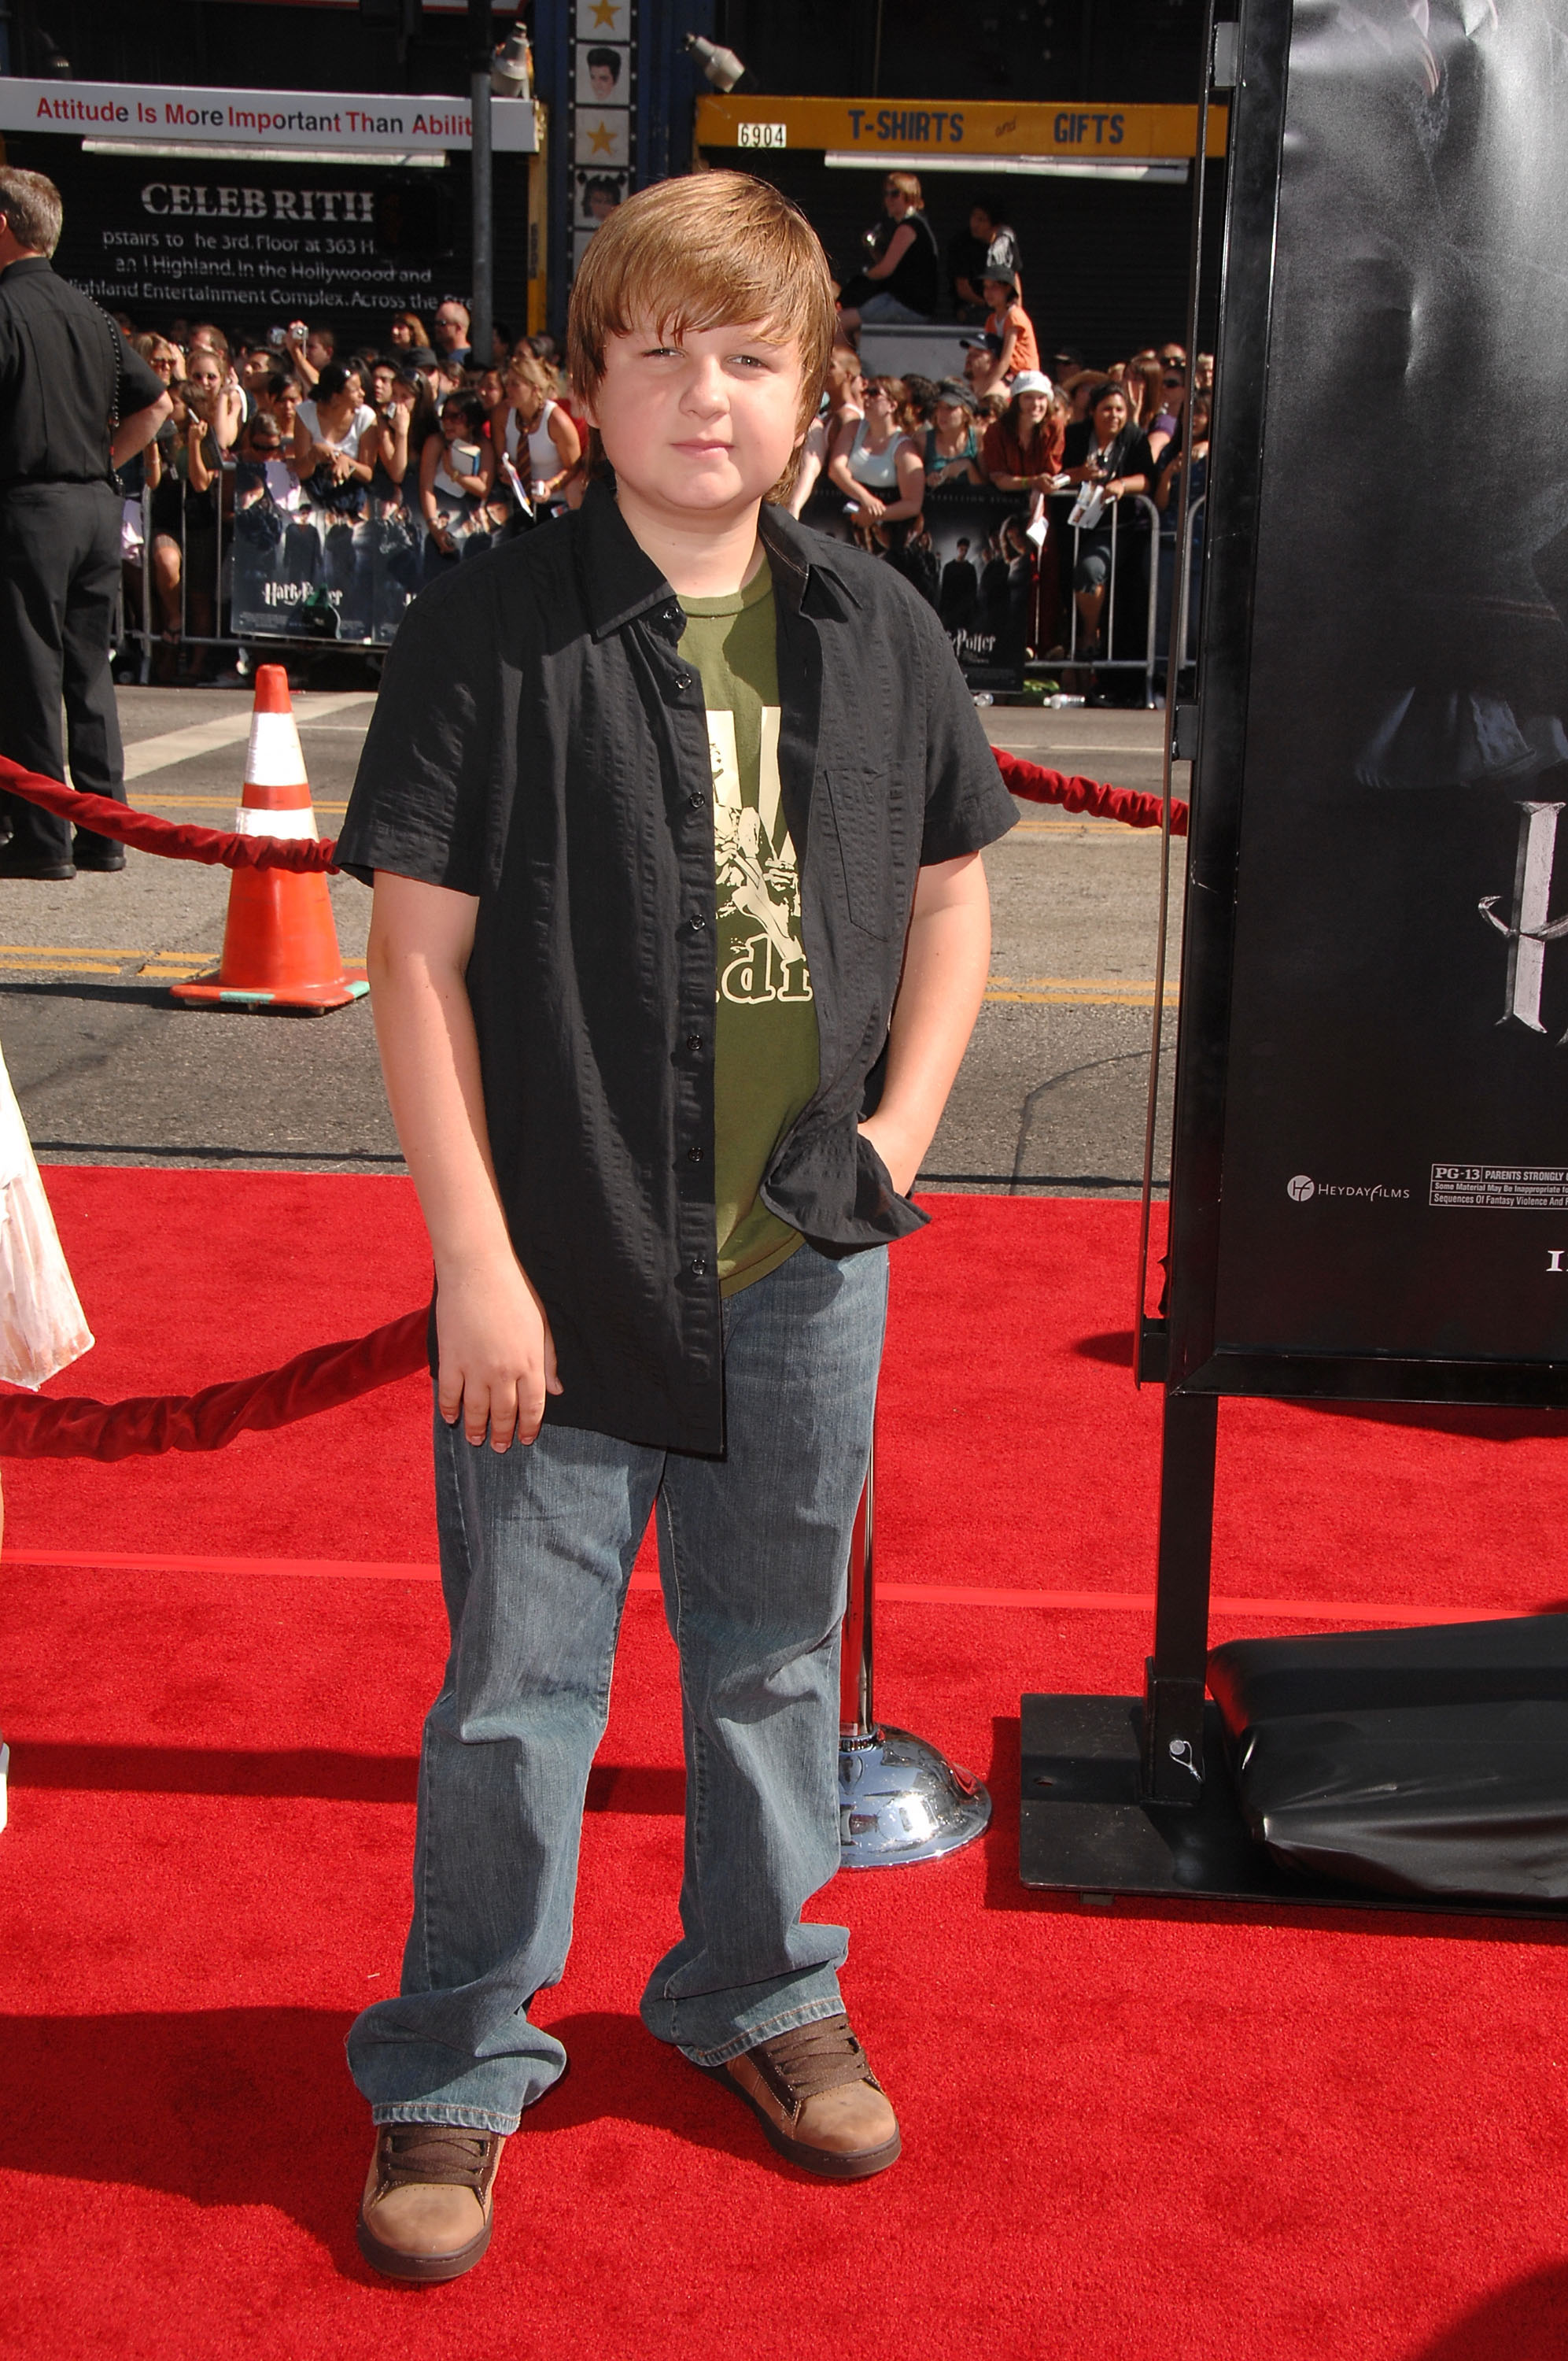 Actor Angus T. Jones at the "Harry Potter and The Order of the Phoenix" premiere in Los Angeles in 2007 | Source: Getty Images